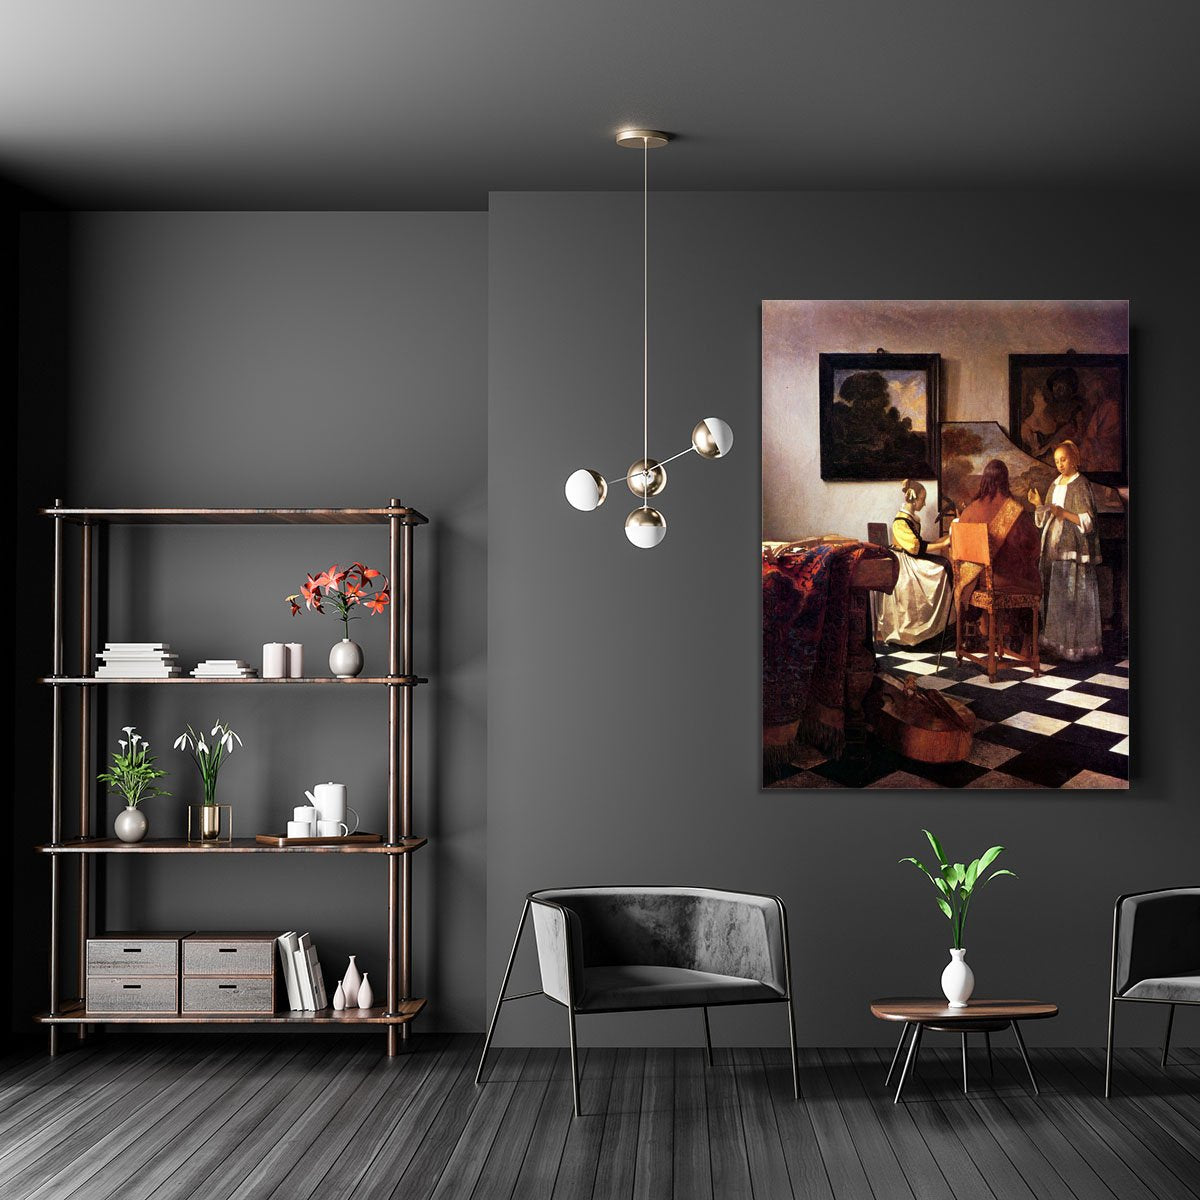 Musical Trio by Vermeer Canvas Print or Poster